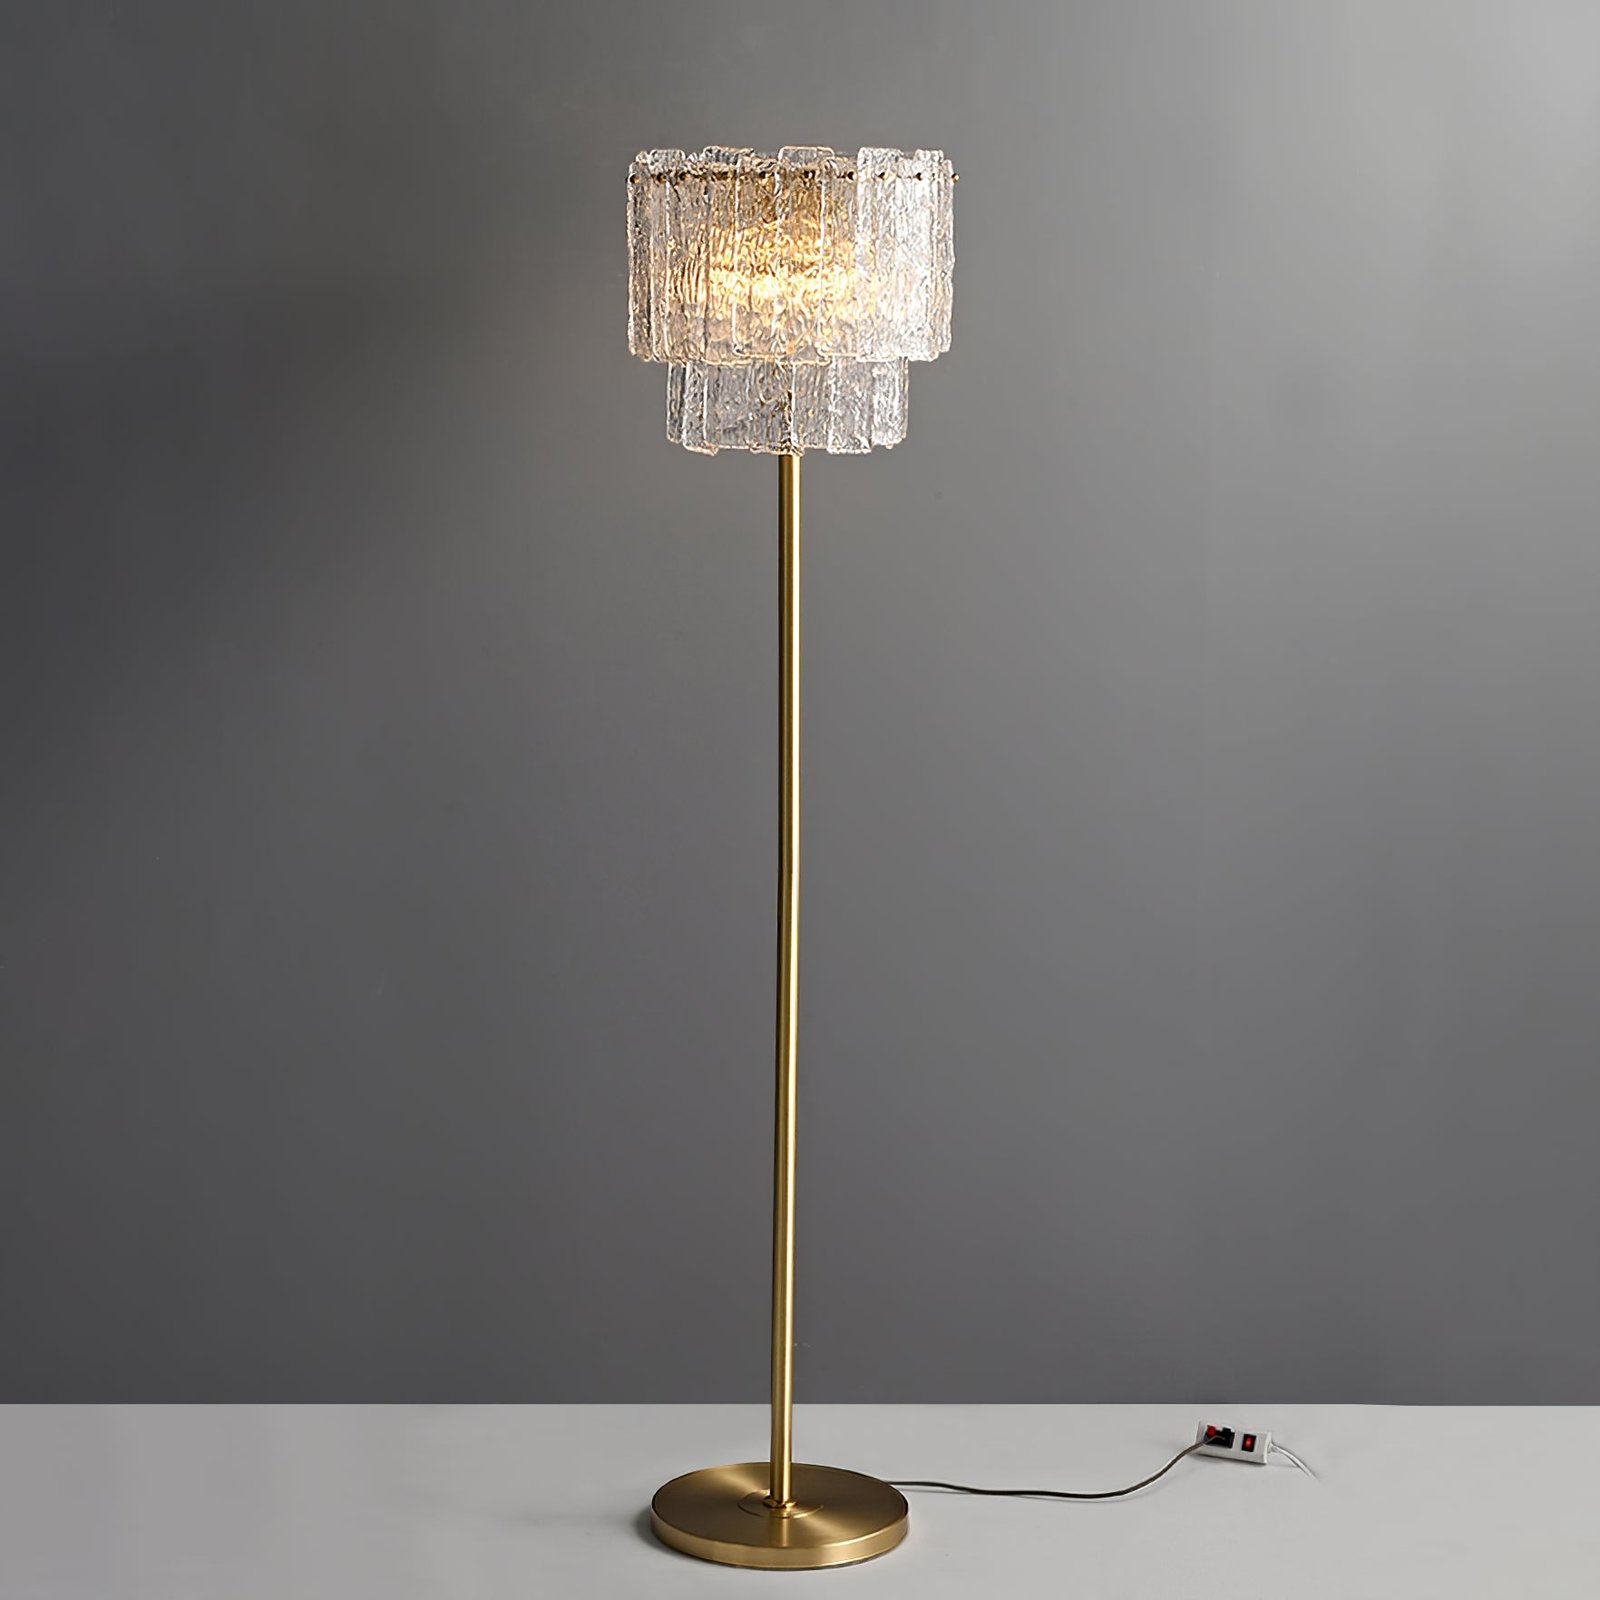 Floor Lamp - Skylar, Brass and Clear, Diameter 13.7 inches x Height 62.9 inches (35cm x 160cm), Includes EU Plug